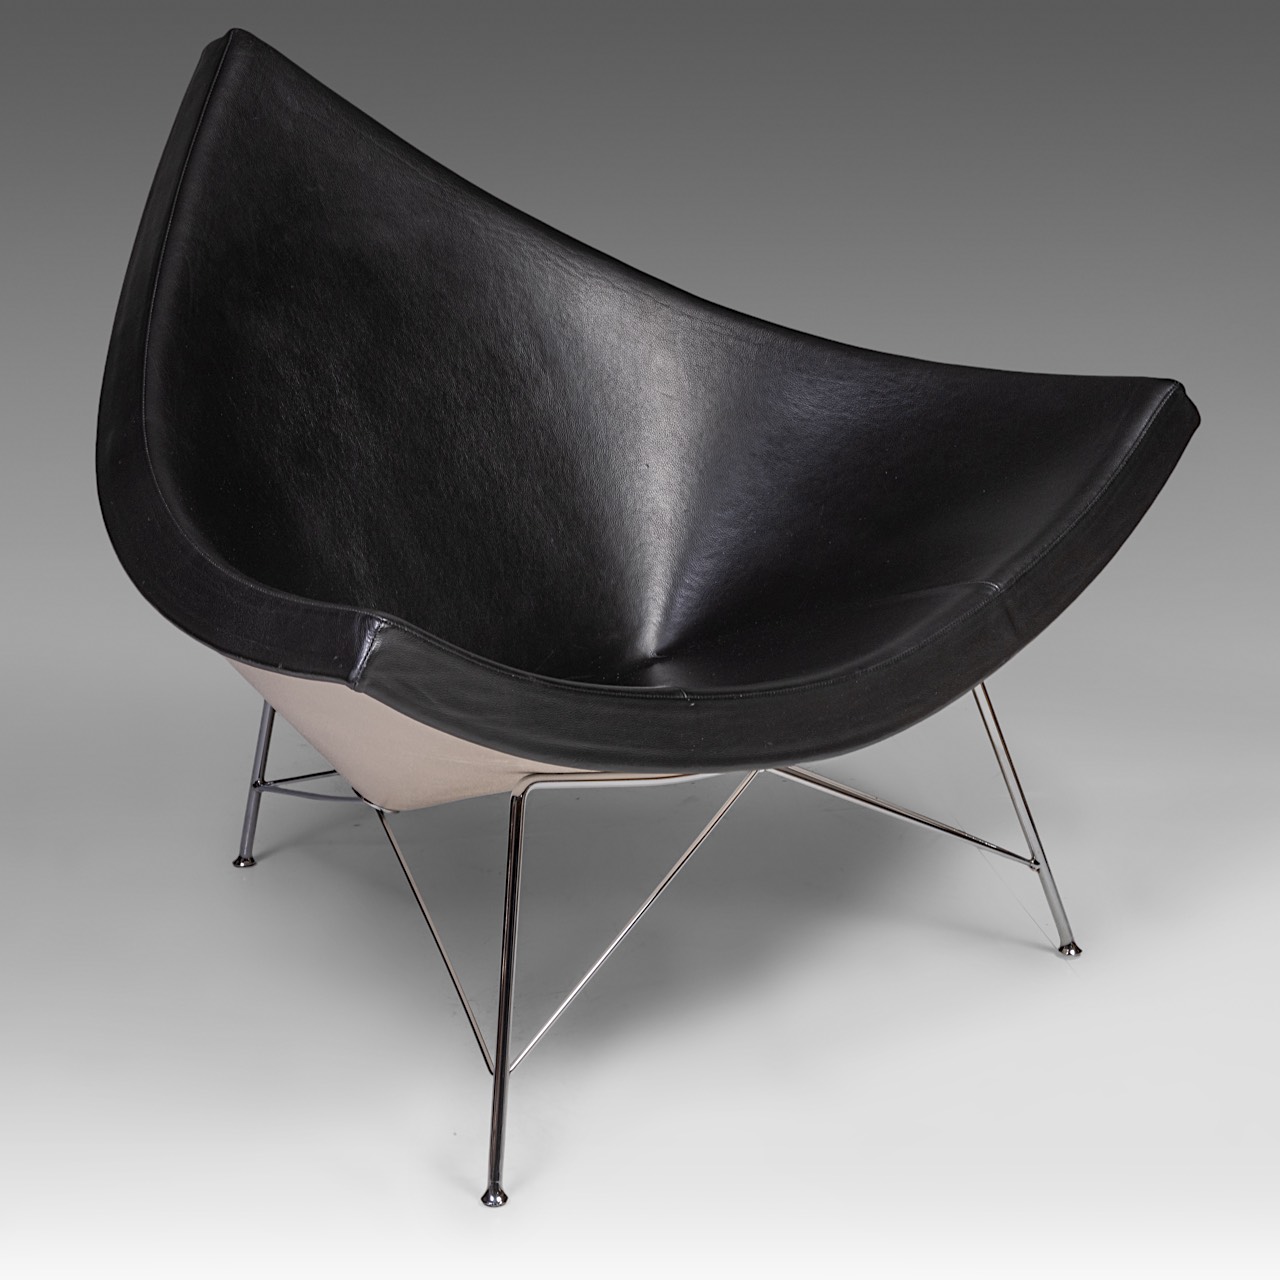 Coconut chair by George Nelson for Vitra, H 105 - W 82 cm - Image 3 of 10